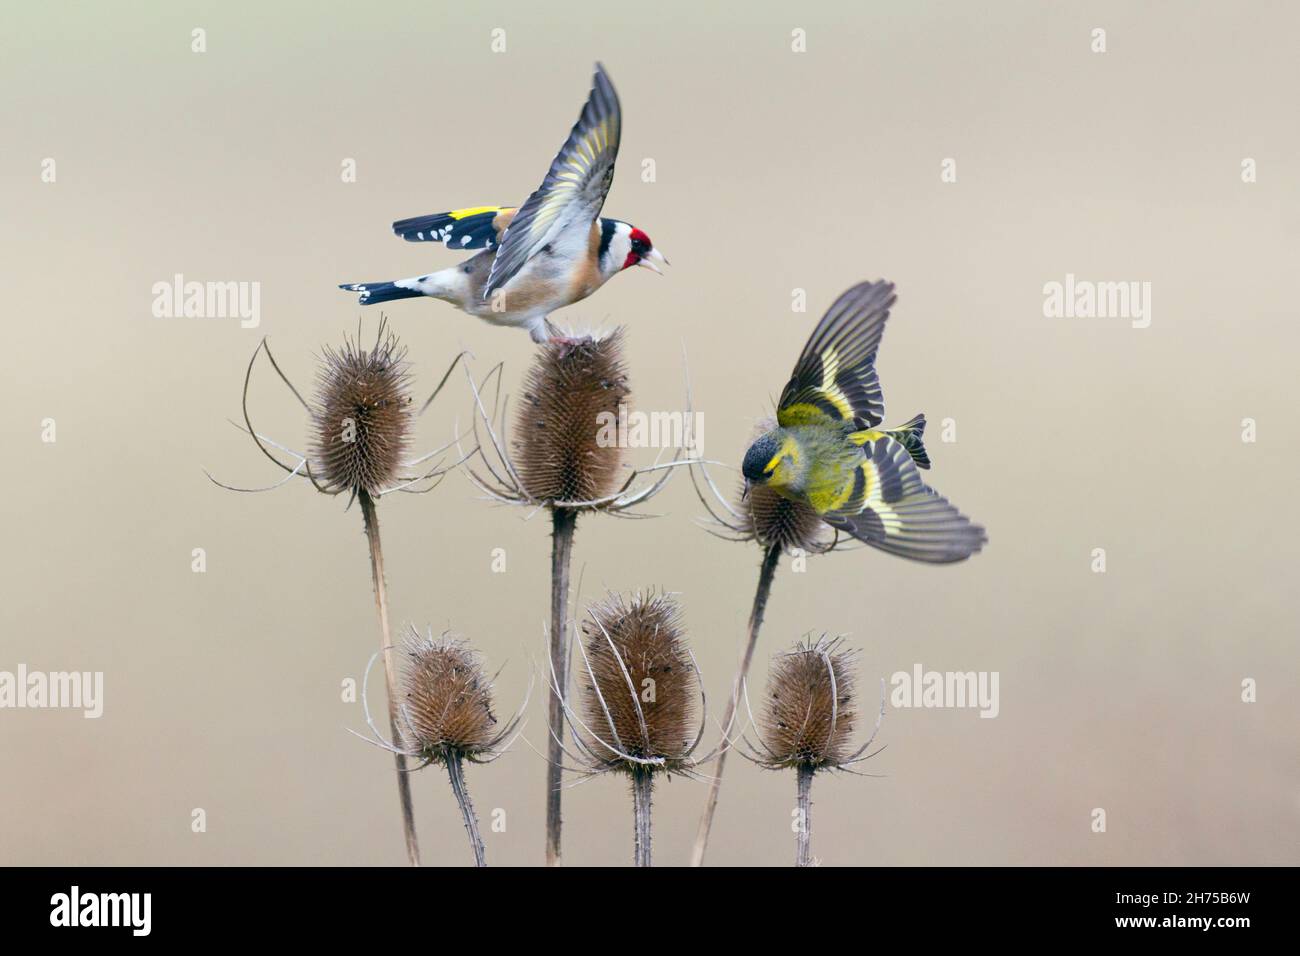 Goldfinch (Carduelis carduelis), and Siskin, (Carduelis spinus) feeding on Teasel plant, in winter, lower Saxony, Germany Stock Photo